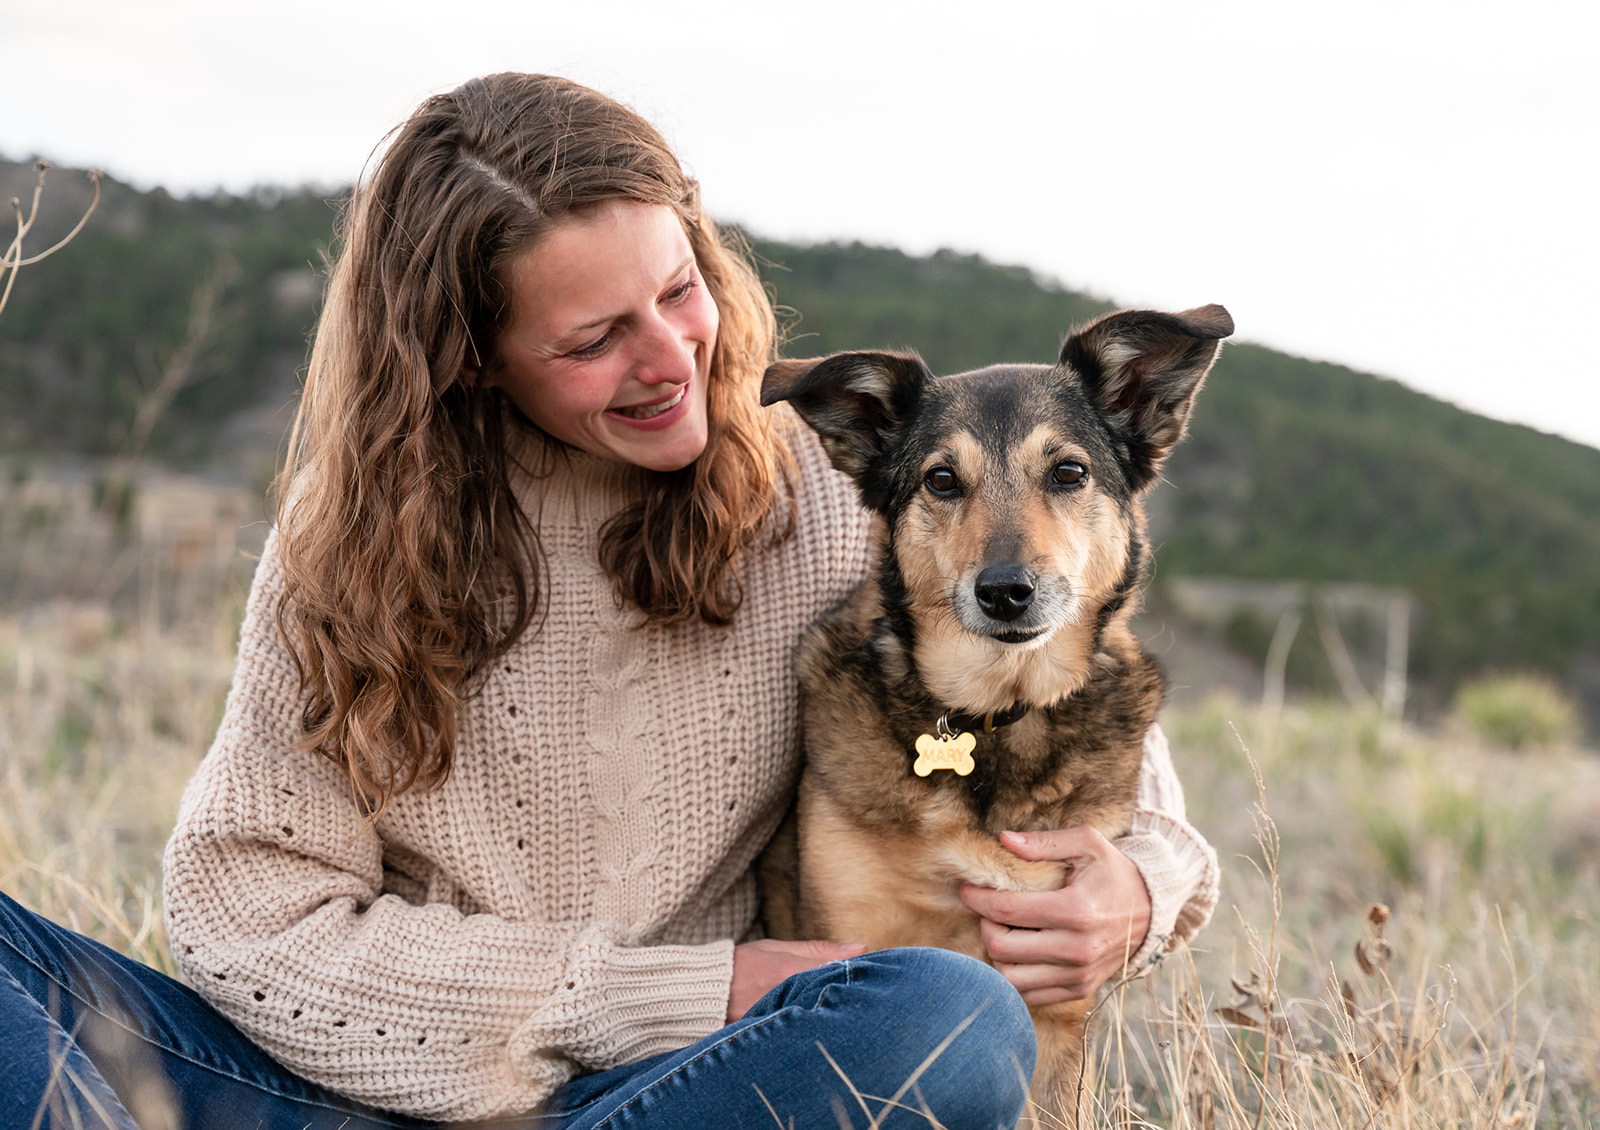 Woman and her dog enjoy a sweet moment while visiting Lory State Park near Fort Collins, Colorado